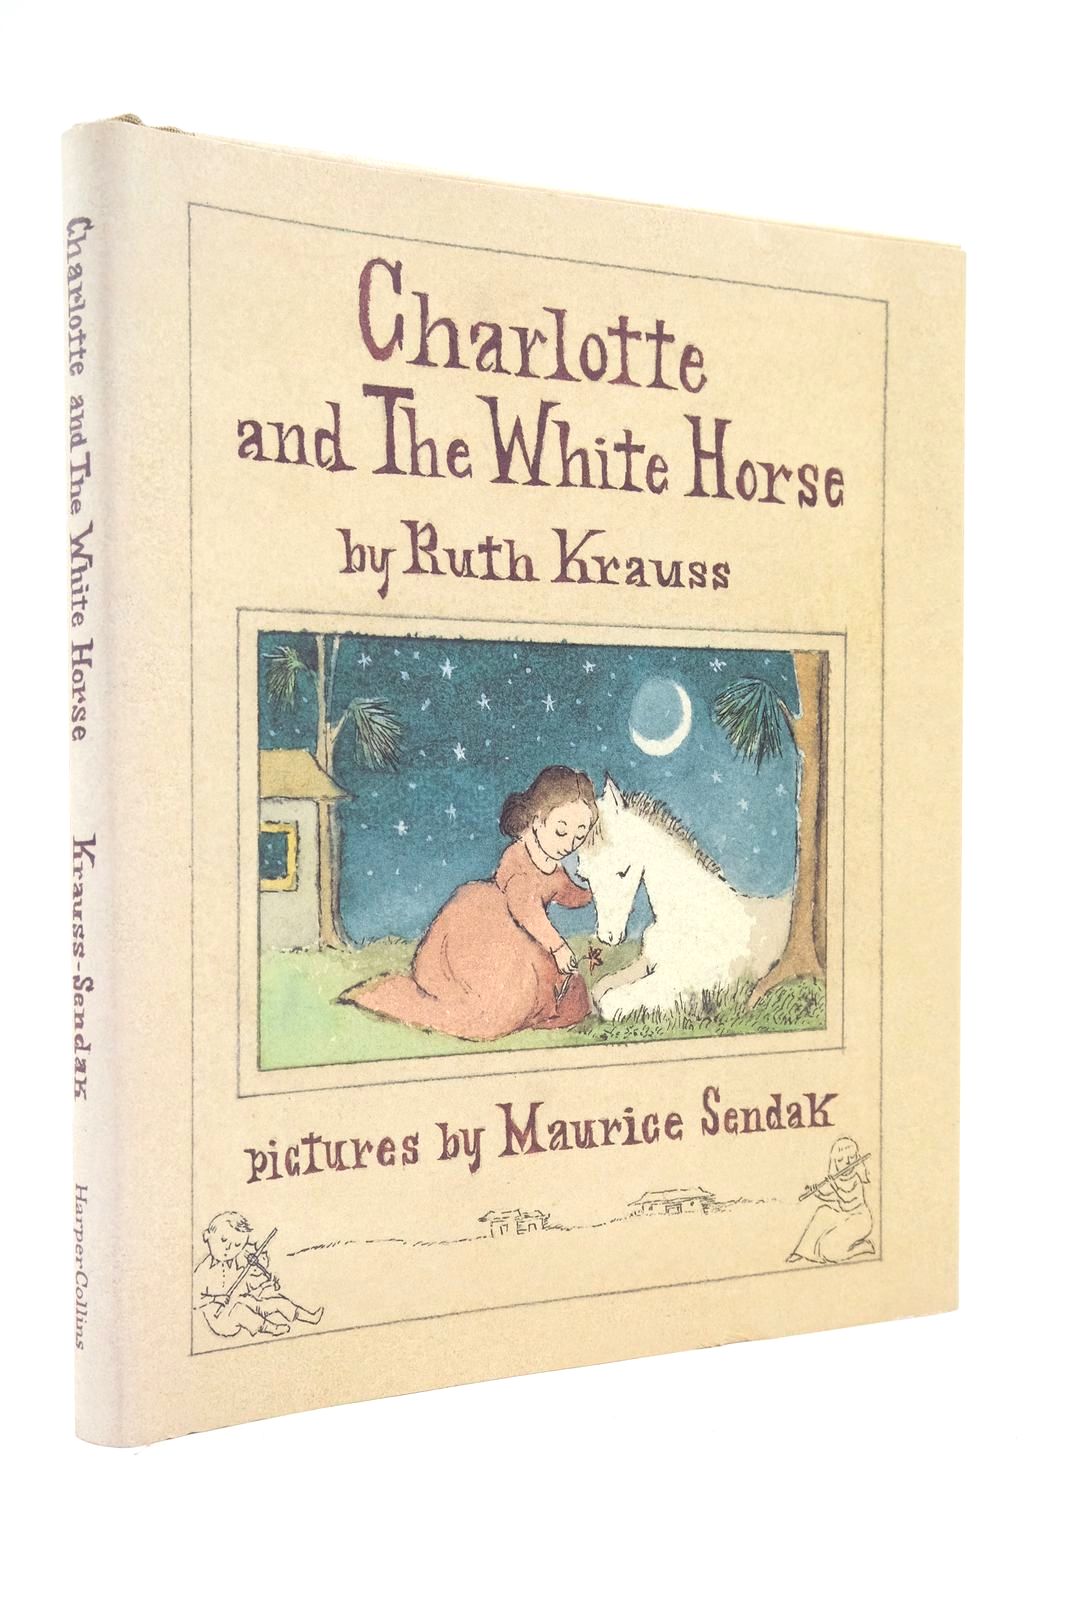 Photo of CHARLOTTE AND THE WHITE HORSE written by Krauss, Ruth illustrated by Sendak, Maurice published by Harper Collins Childrens Books (STOCK CODE: 2138604)  for sale by Stella & Rose's Books